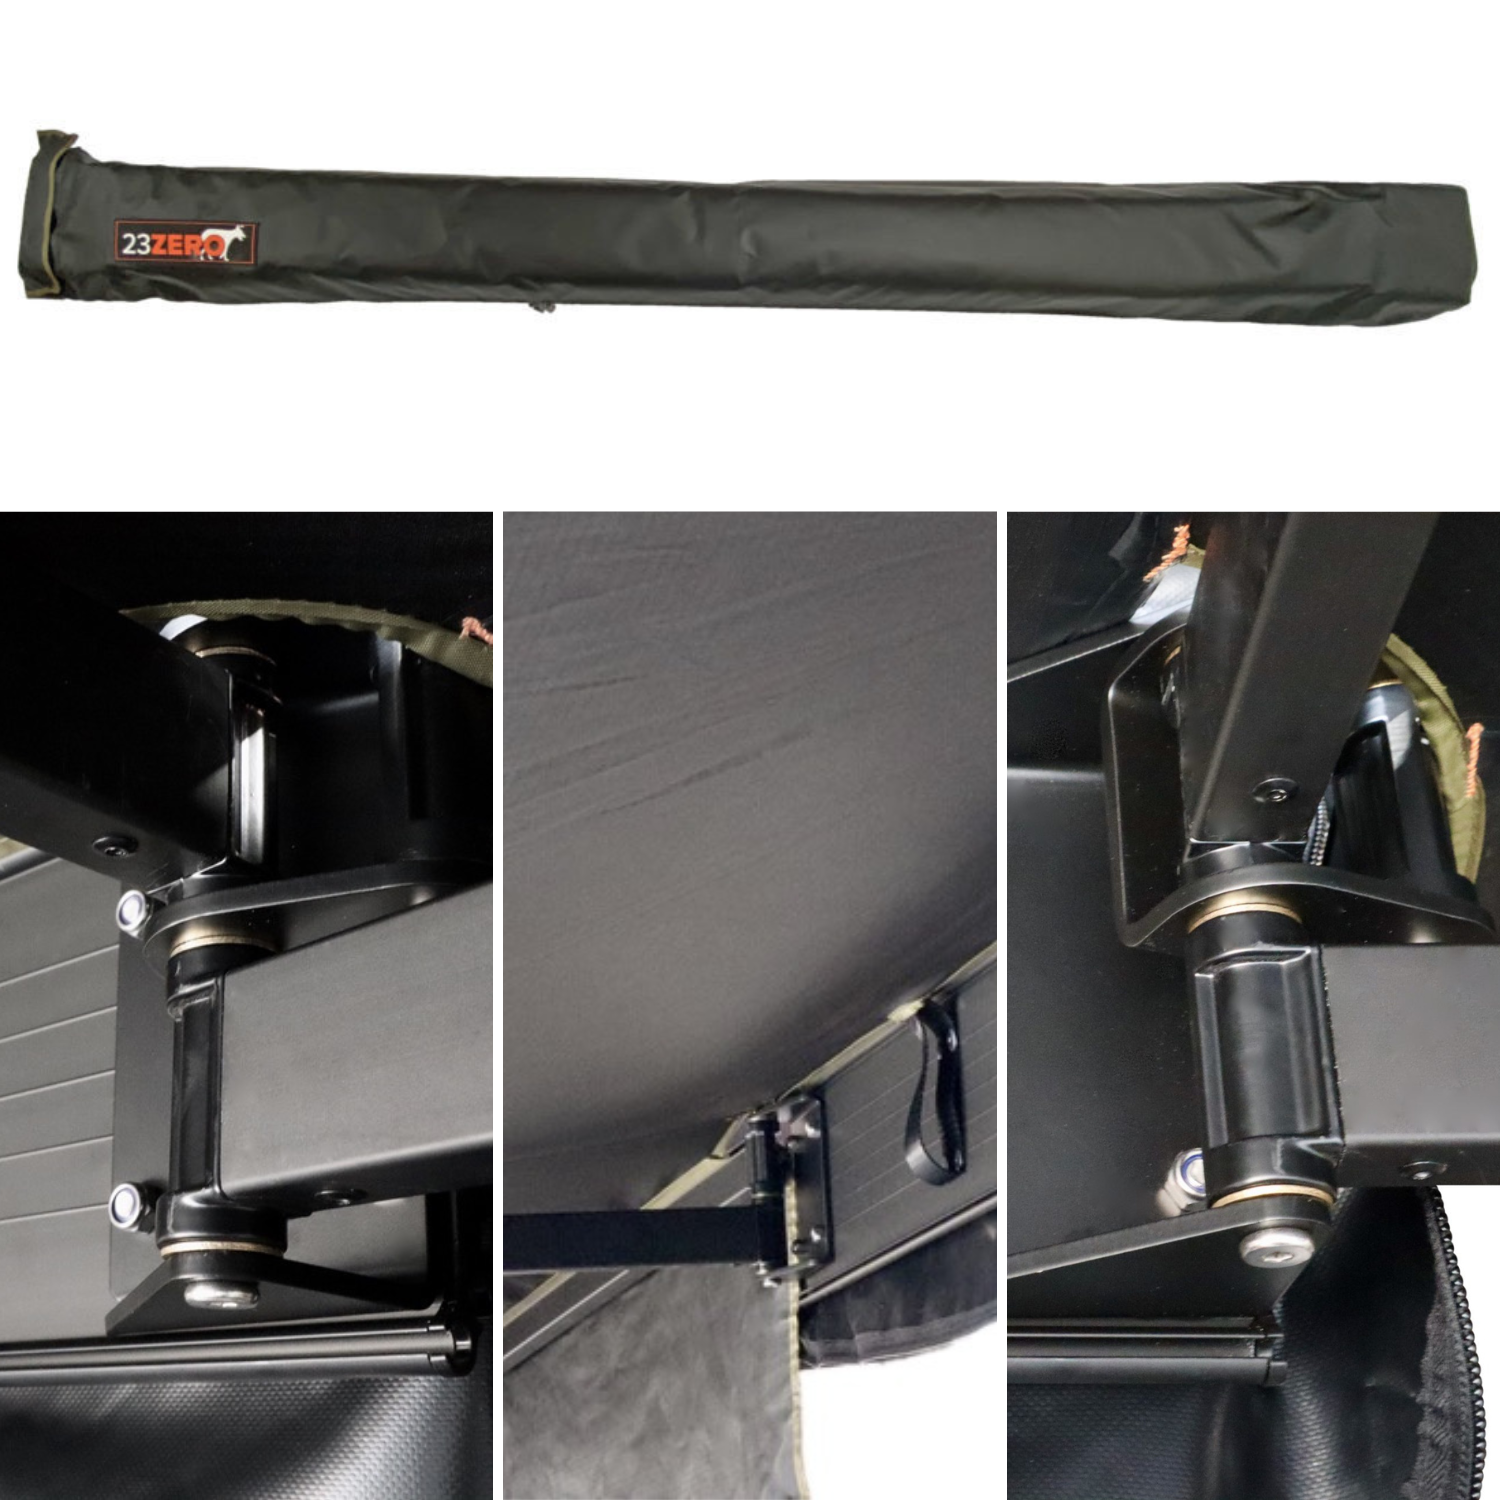 23Zero Peregrine 270 Driver Side Awning - Version 2.0